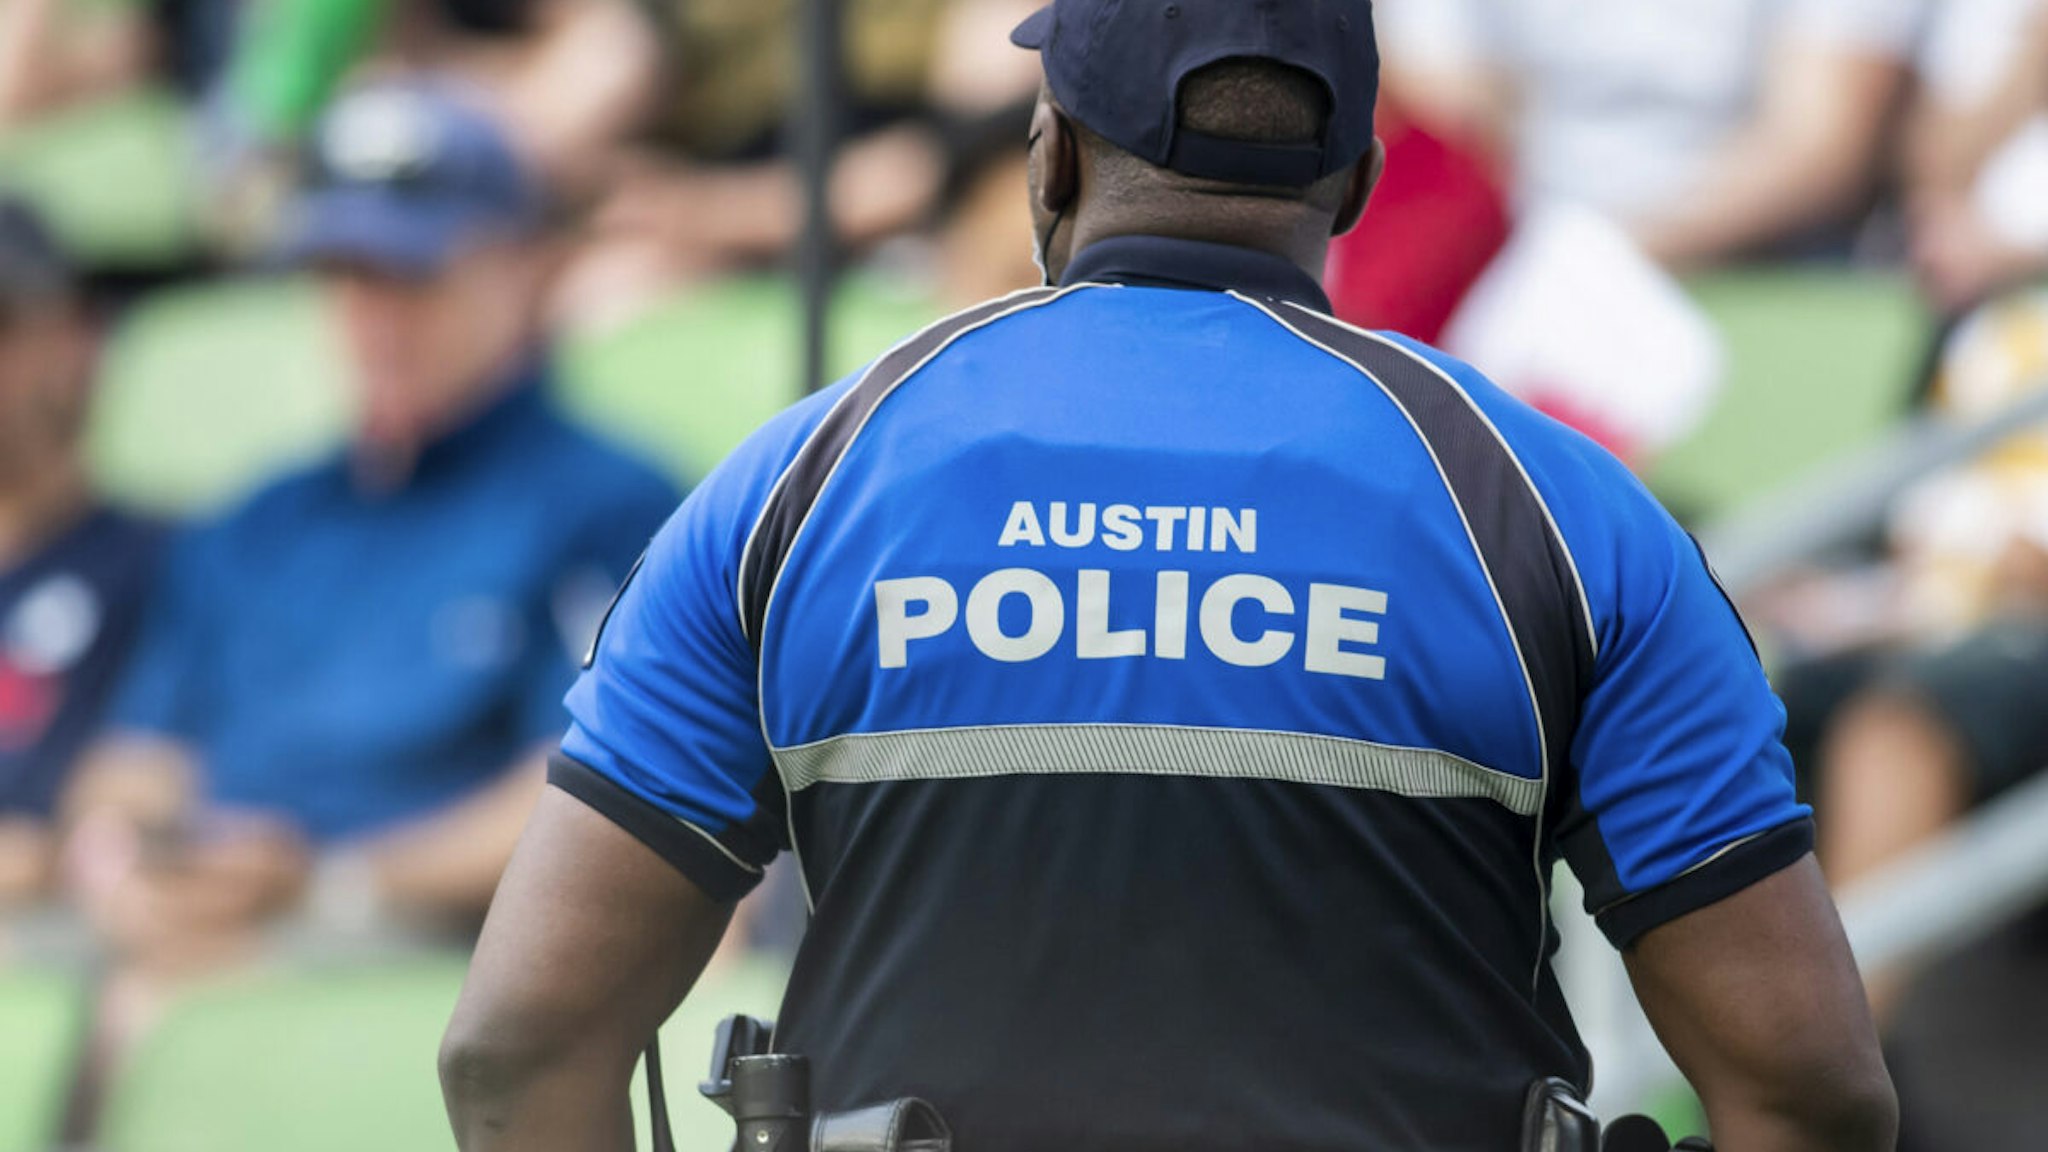 A member of the Austin, Texas police department stands watch during the Gold Cup semifinal match between the United States and Qatar on Thursday July 29th, 2021 at Q2 stadium in Austin,TX.